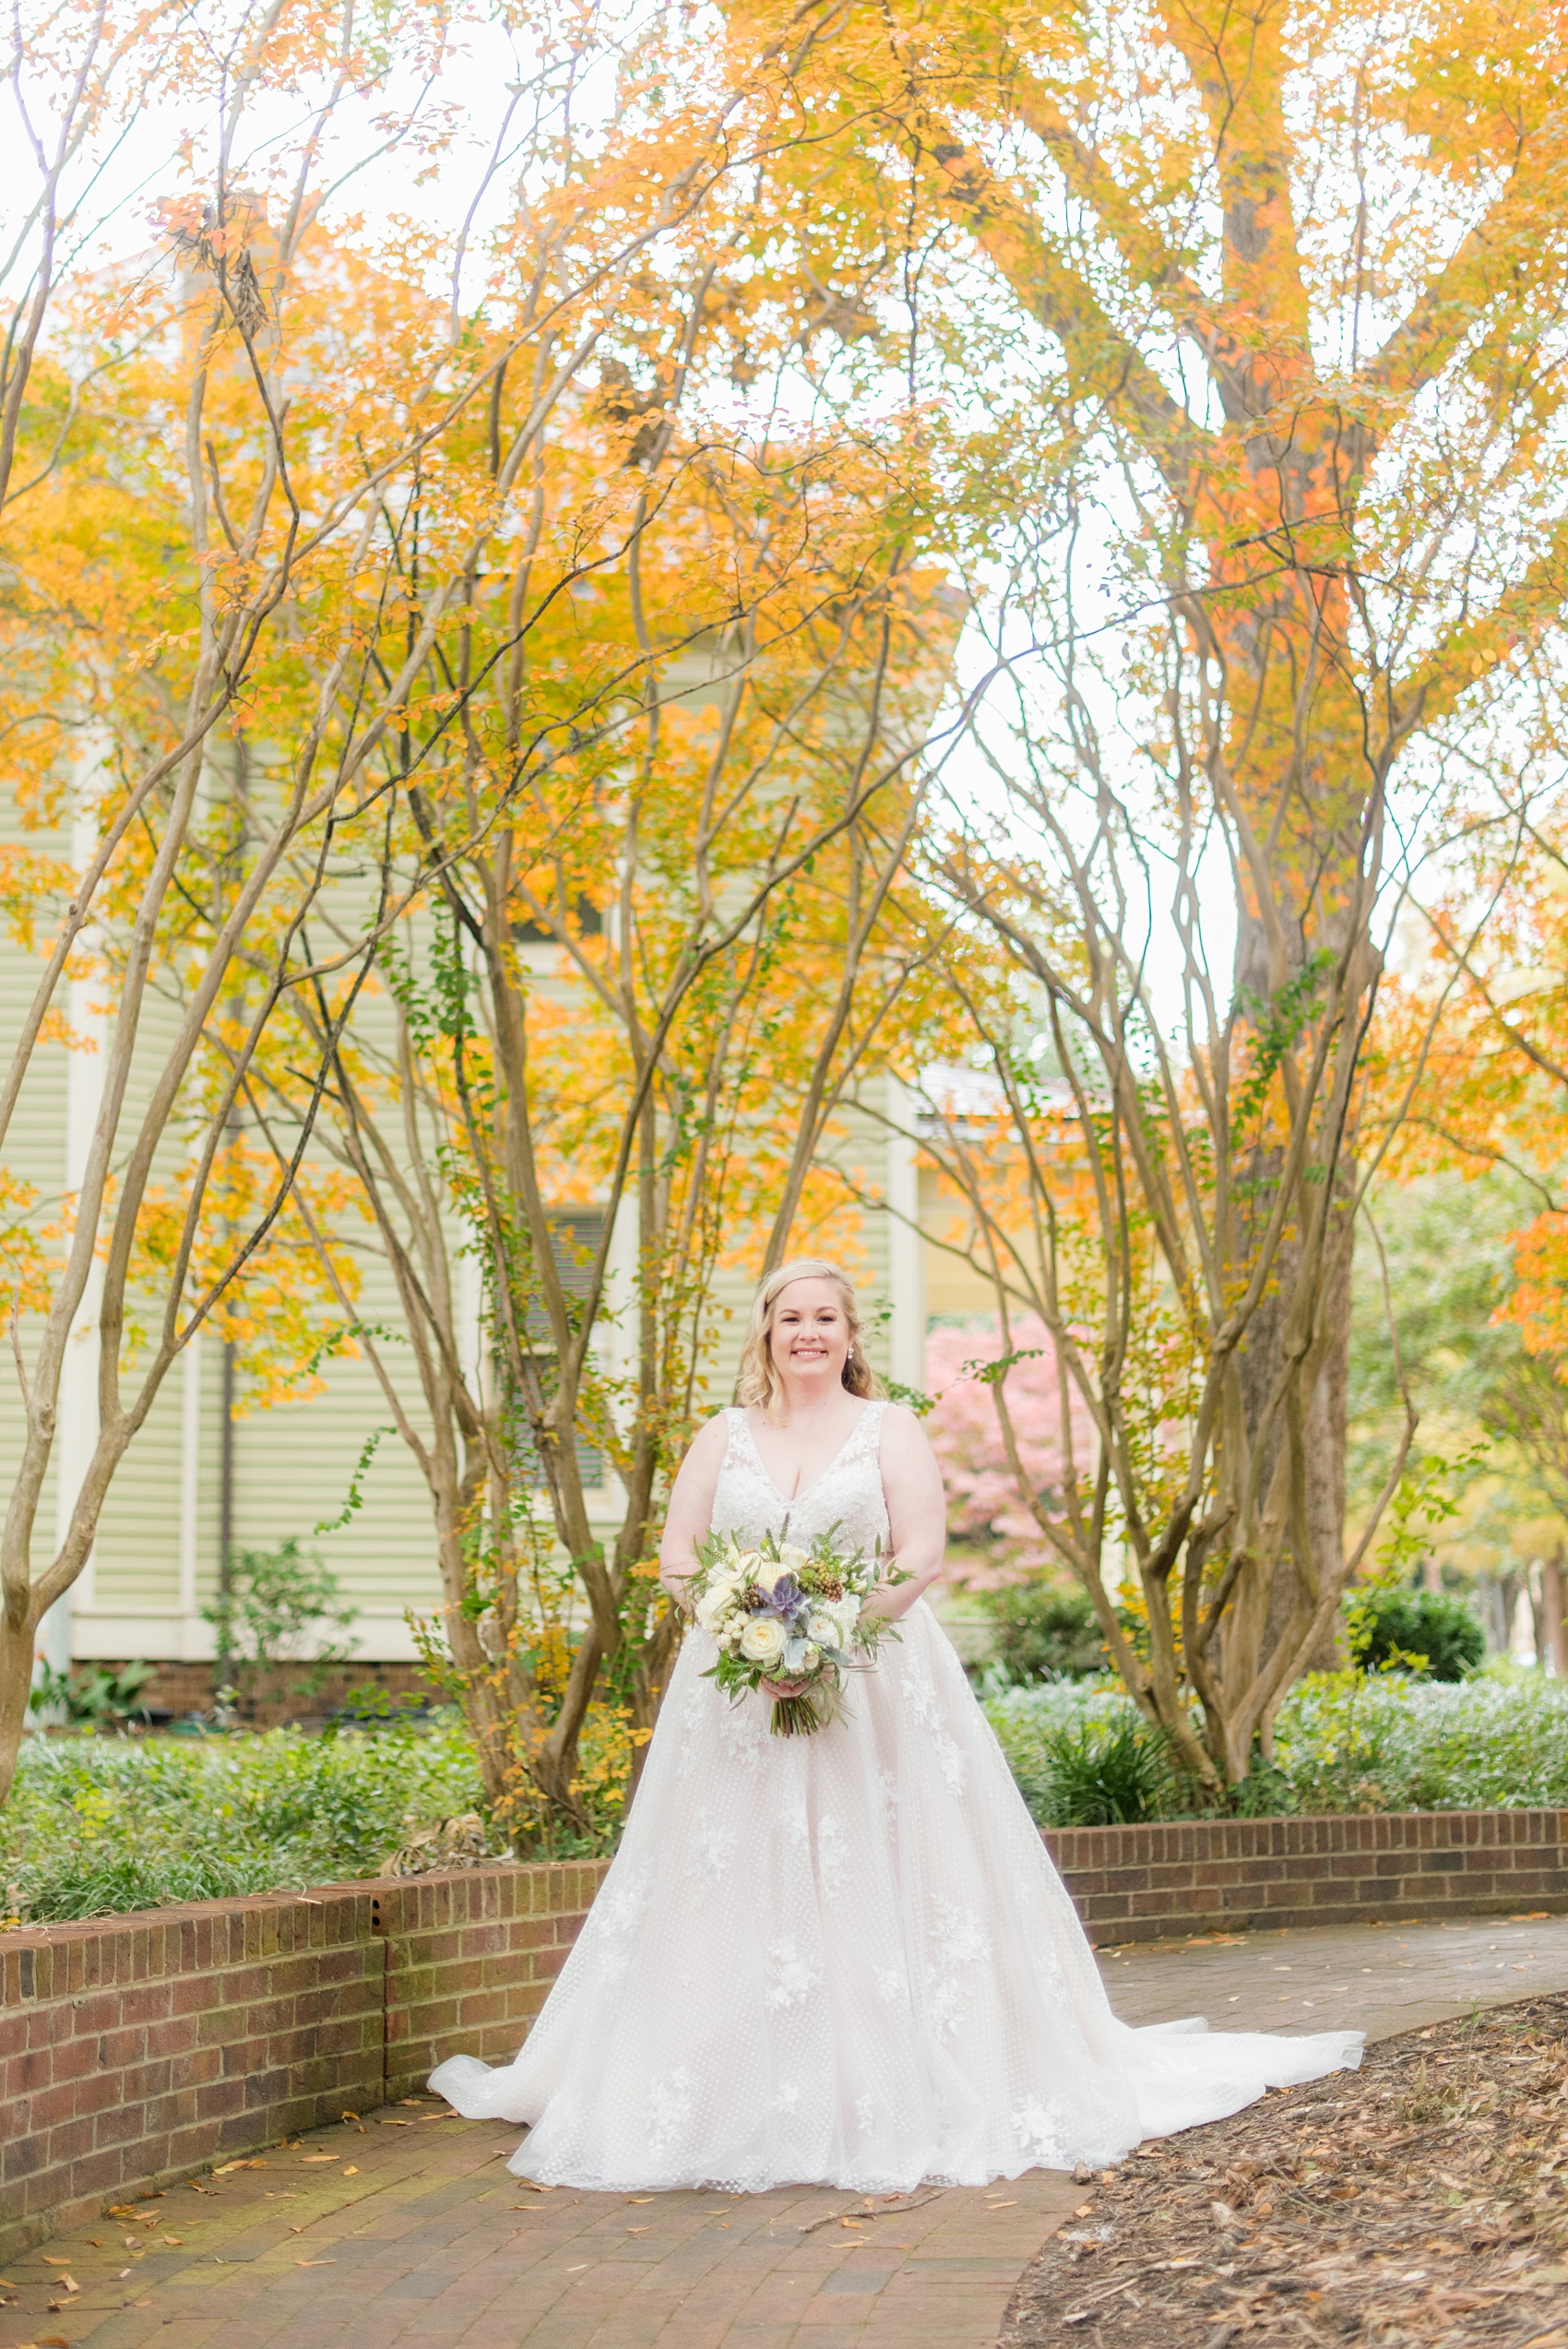 Mikkel Paige Photography captures a beautiful bridal portrait for a fall wedding in Downtown Raleigh, North Carolina. All Saints Chapel was their reception venue that they decorated with gold and silver decor and autumn centerpieces. Couple portraits were taken outdoors and the fun event continued inside the unique, and historic venue. Click through for all the details from this amazing celebration! #MikkelPaige #RaleighWeddingPhotographer #RaleighWeddingVenue #DowntownRaleighWedding